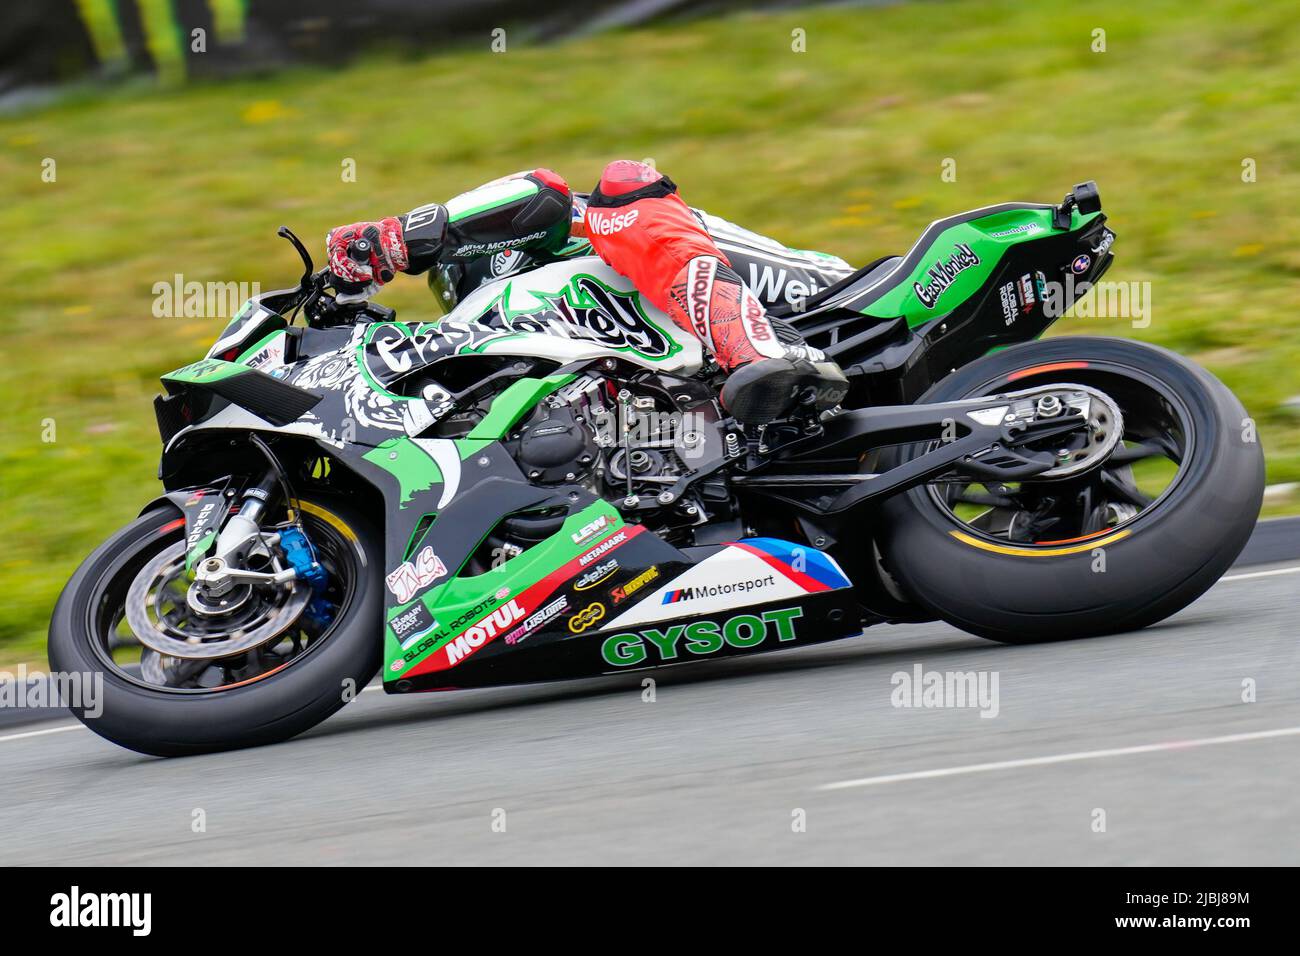 Douglas, Isle Of Man. 19th Jan, 2022. Peter Hickman (1000 BMW) representing the Gas Monkey Garage by FHO Racing team during the RL360 Superstock TT Race at the Isle of Man, Douglas, Isle of Man on the 6 June 2022. Photo by David Horn/PRiME Media Images Credit: PRiME Media Images/Alamy Live News Stock Photo